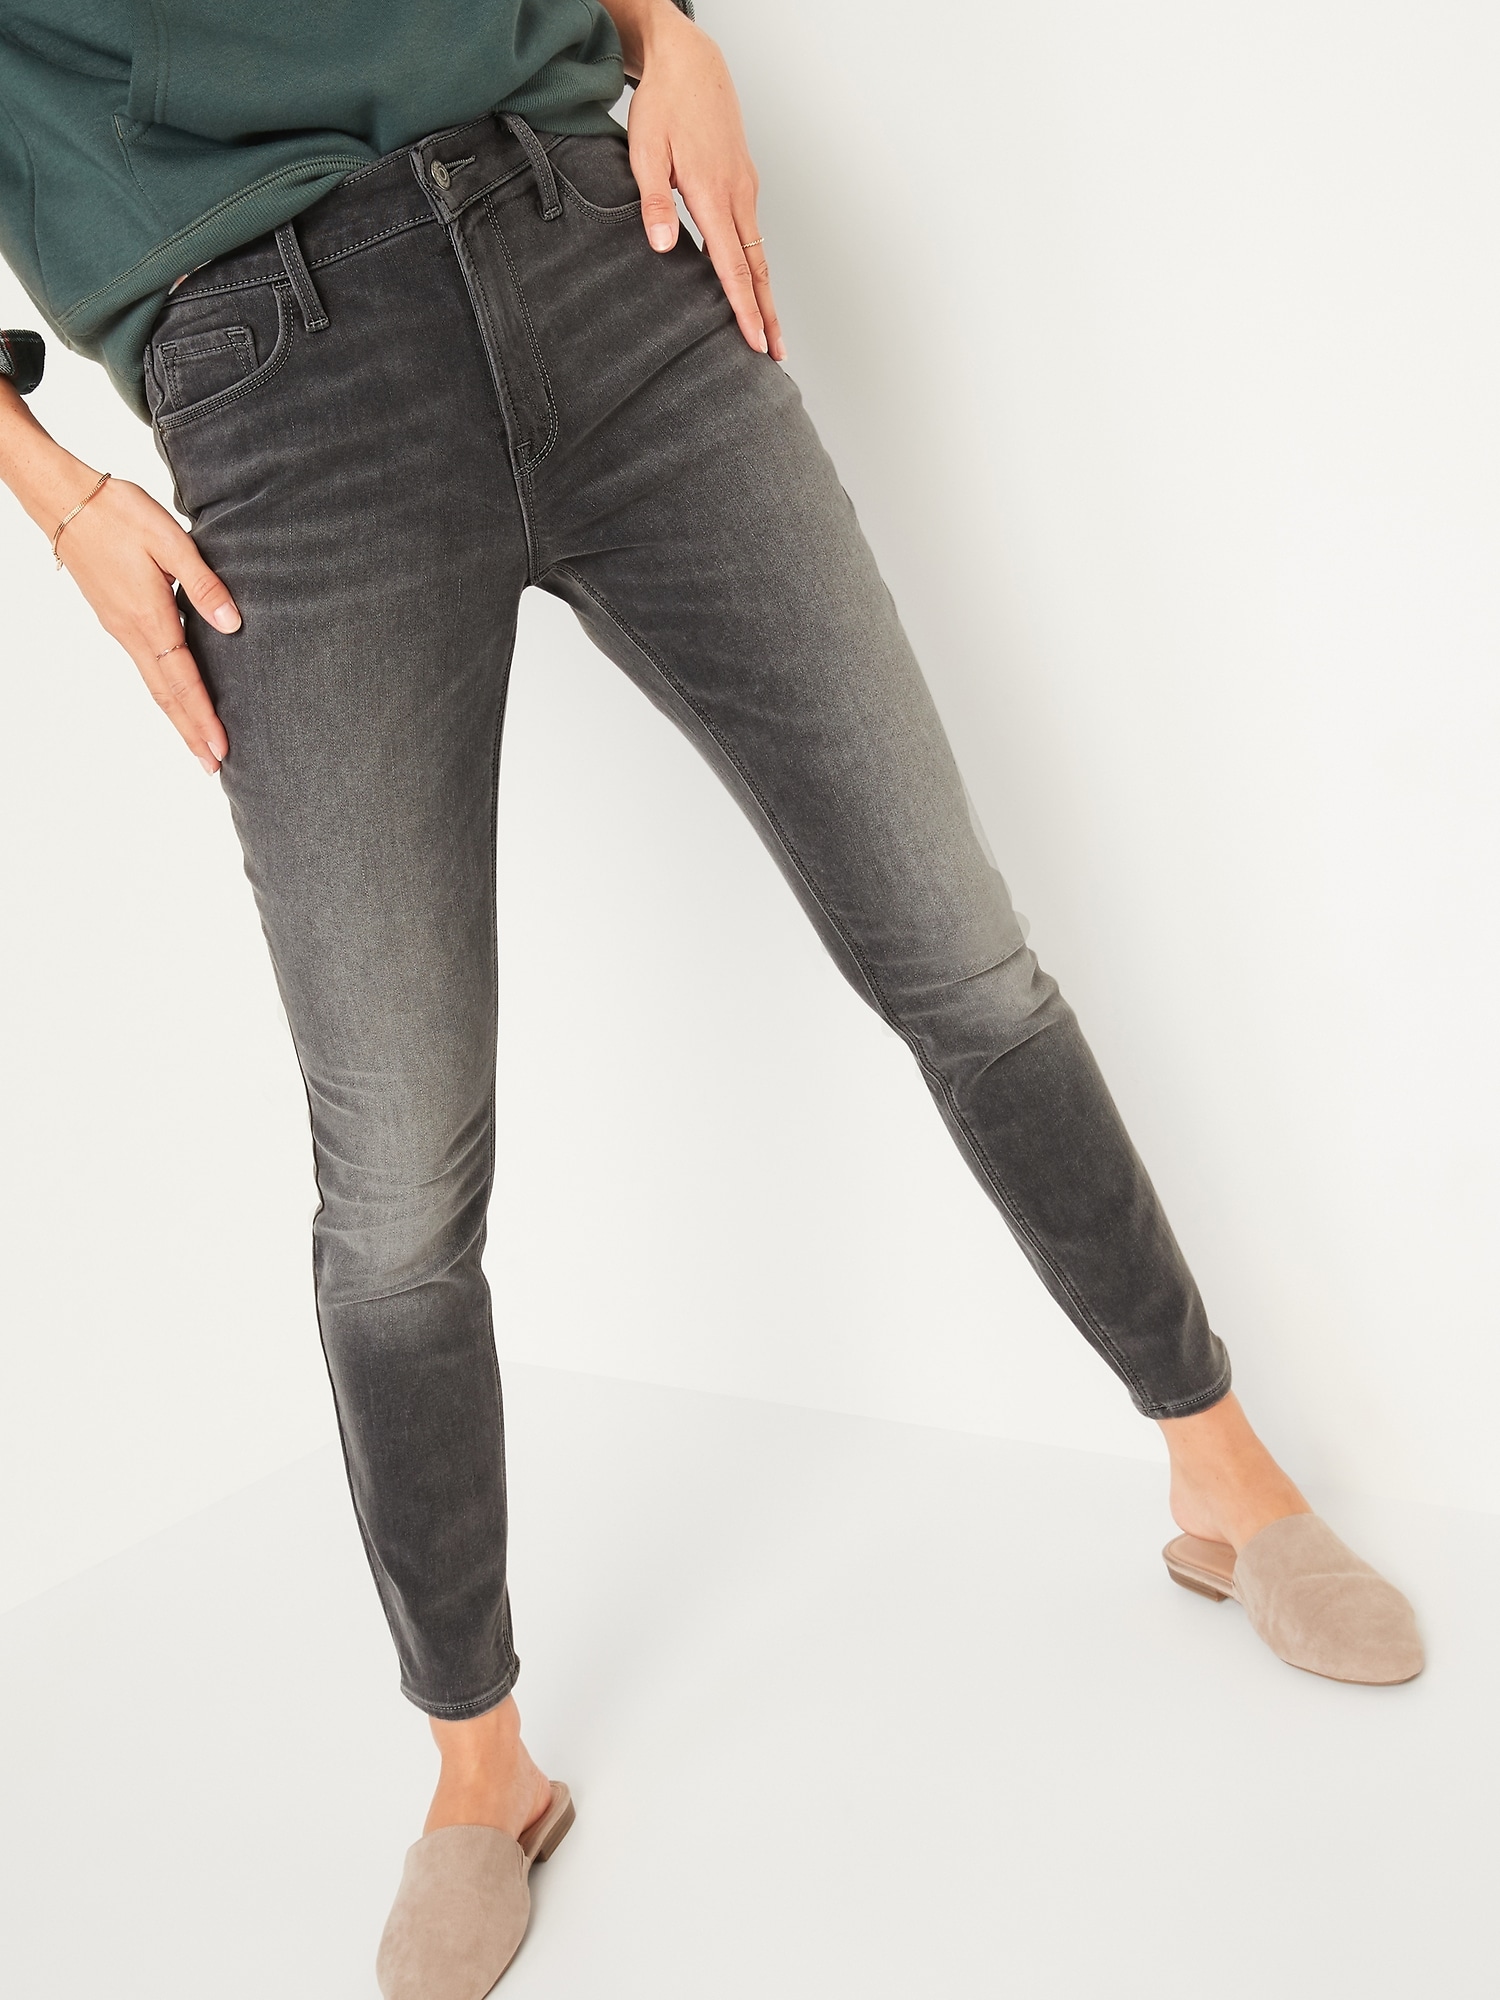 old navy gray jeans